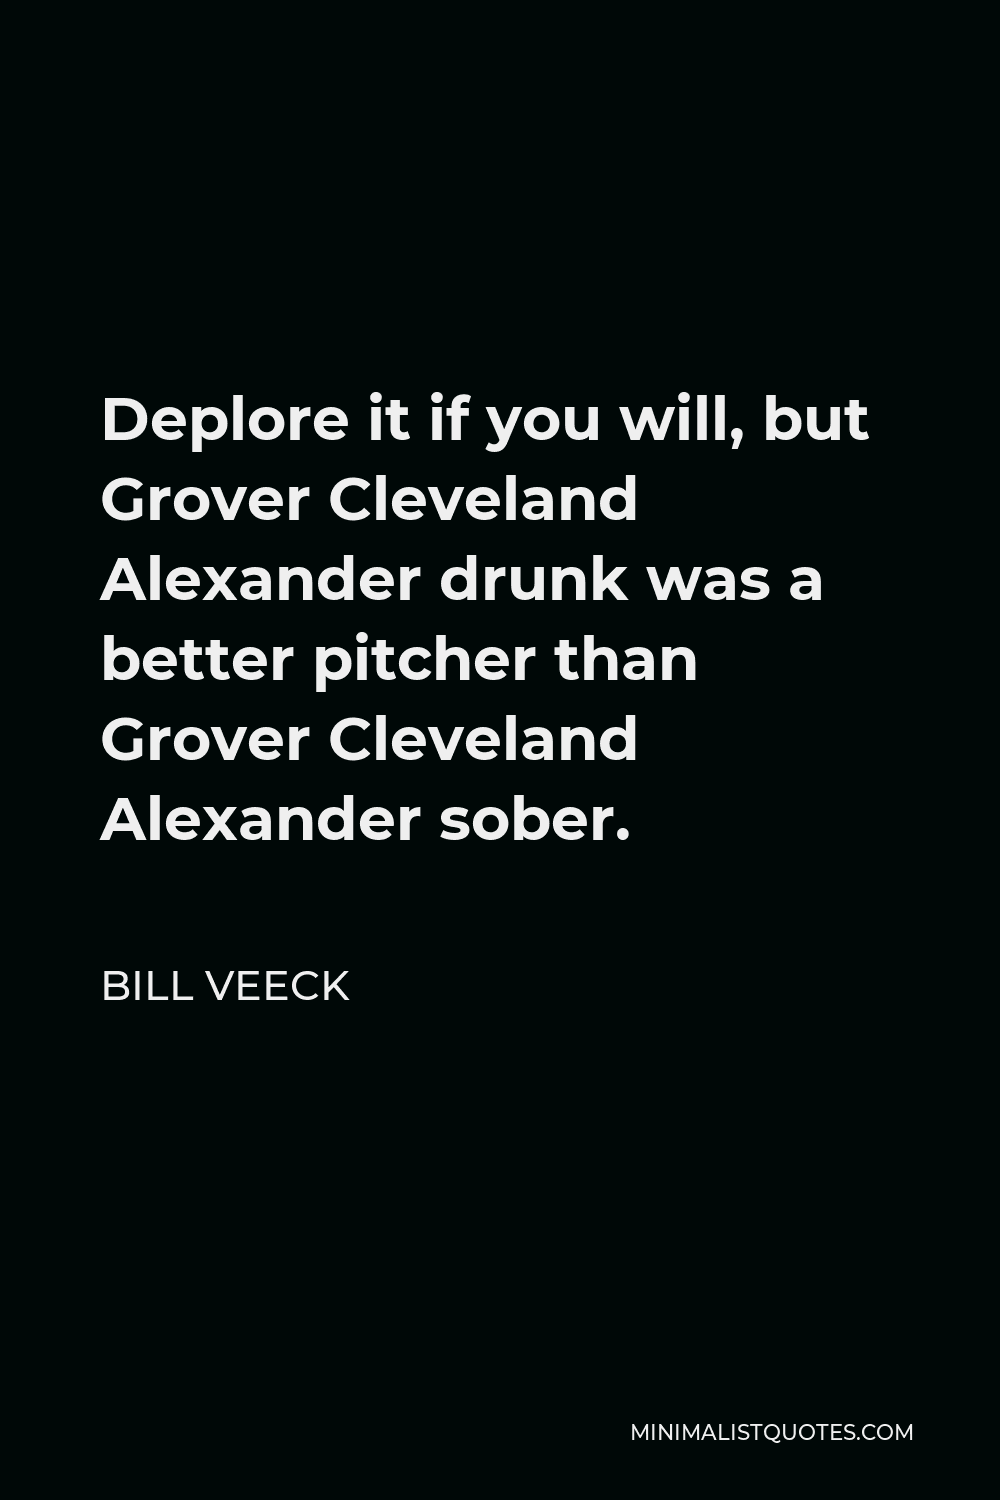 Bill Veeck Quote - Deplore it if you will, but Grover Cleveland Alexander drunk was a better pitcher than Grover Cleveland Alexander sober.